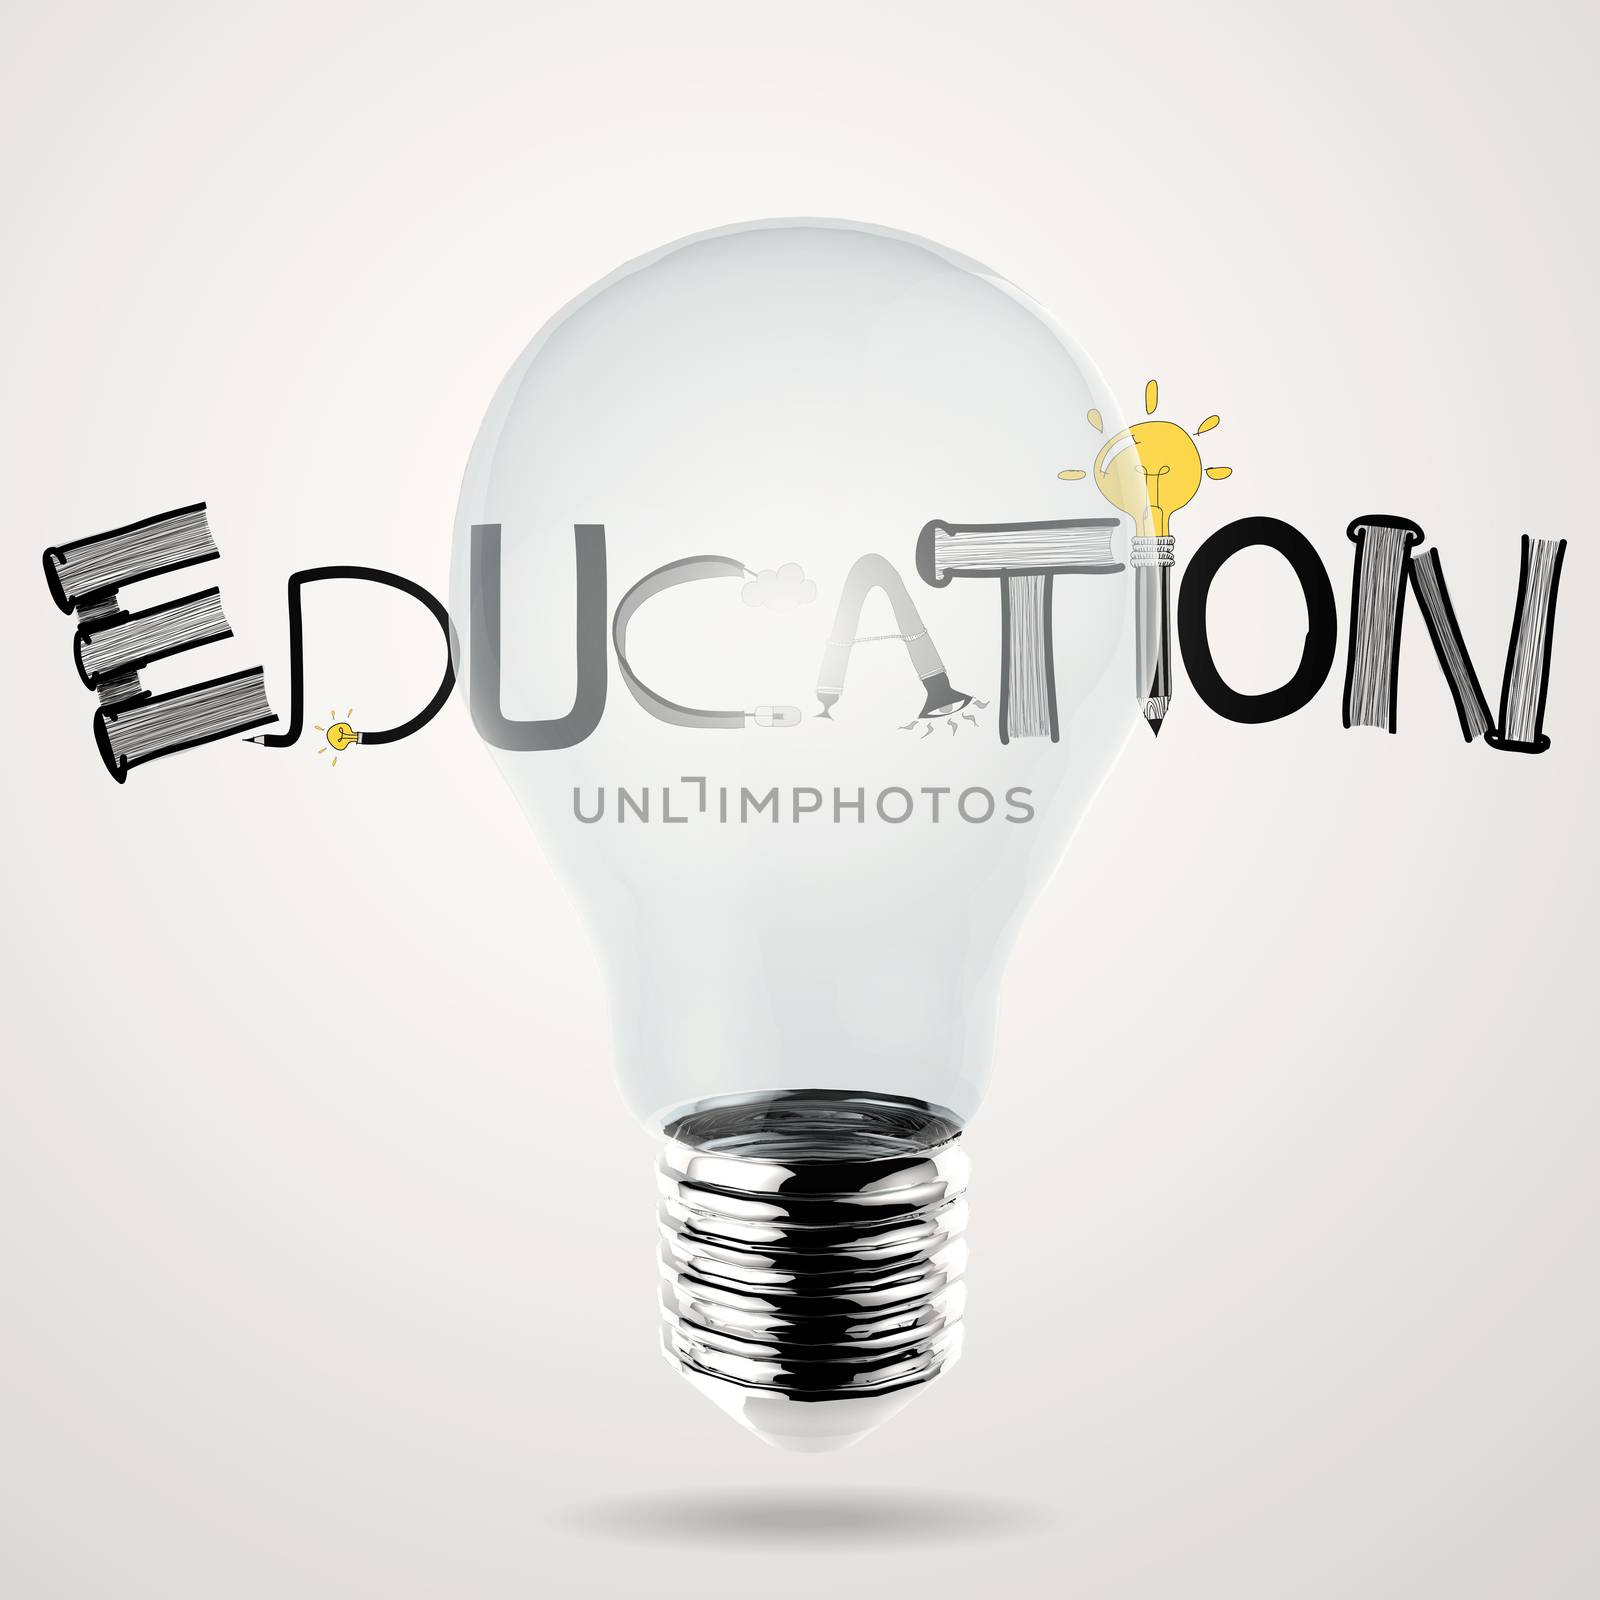  lightbulb 3d and design word EDUCATION as concept